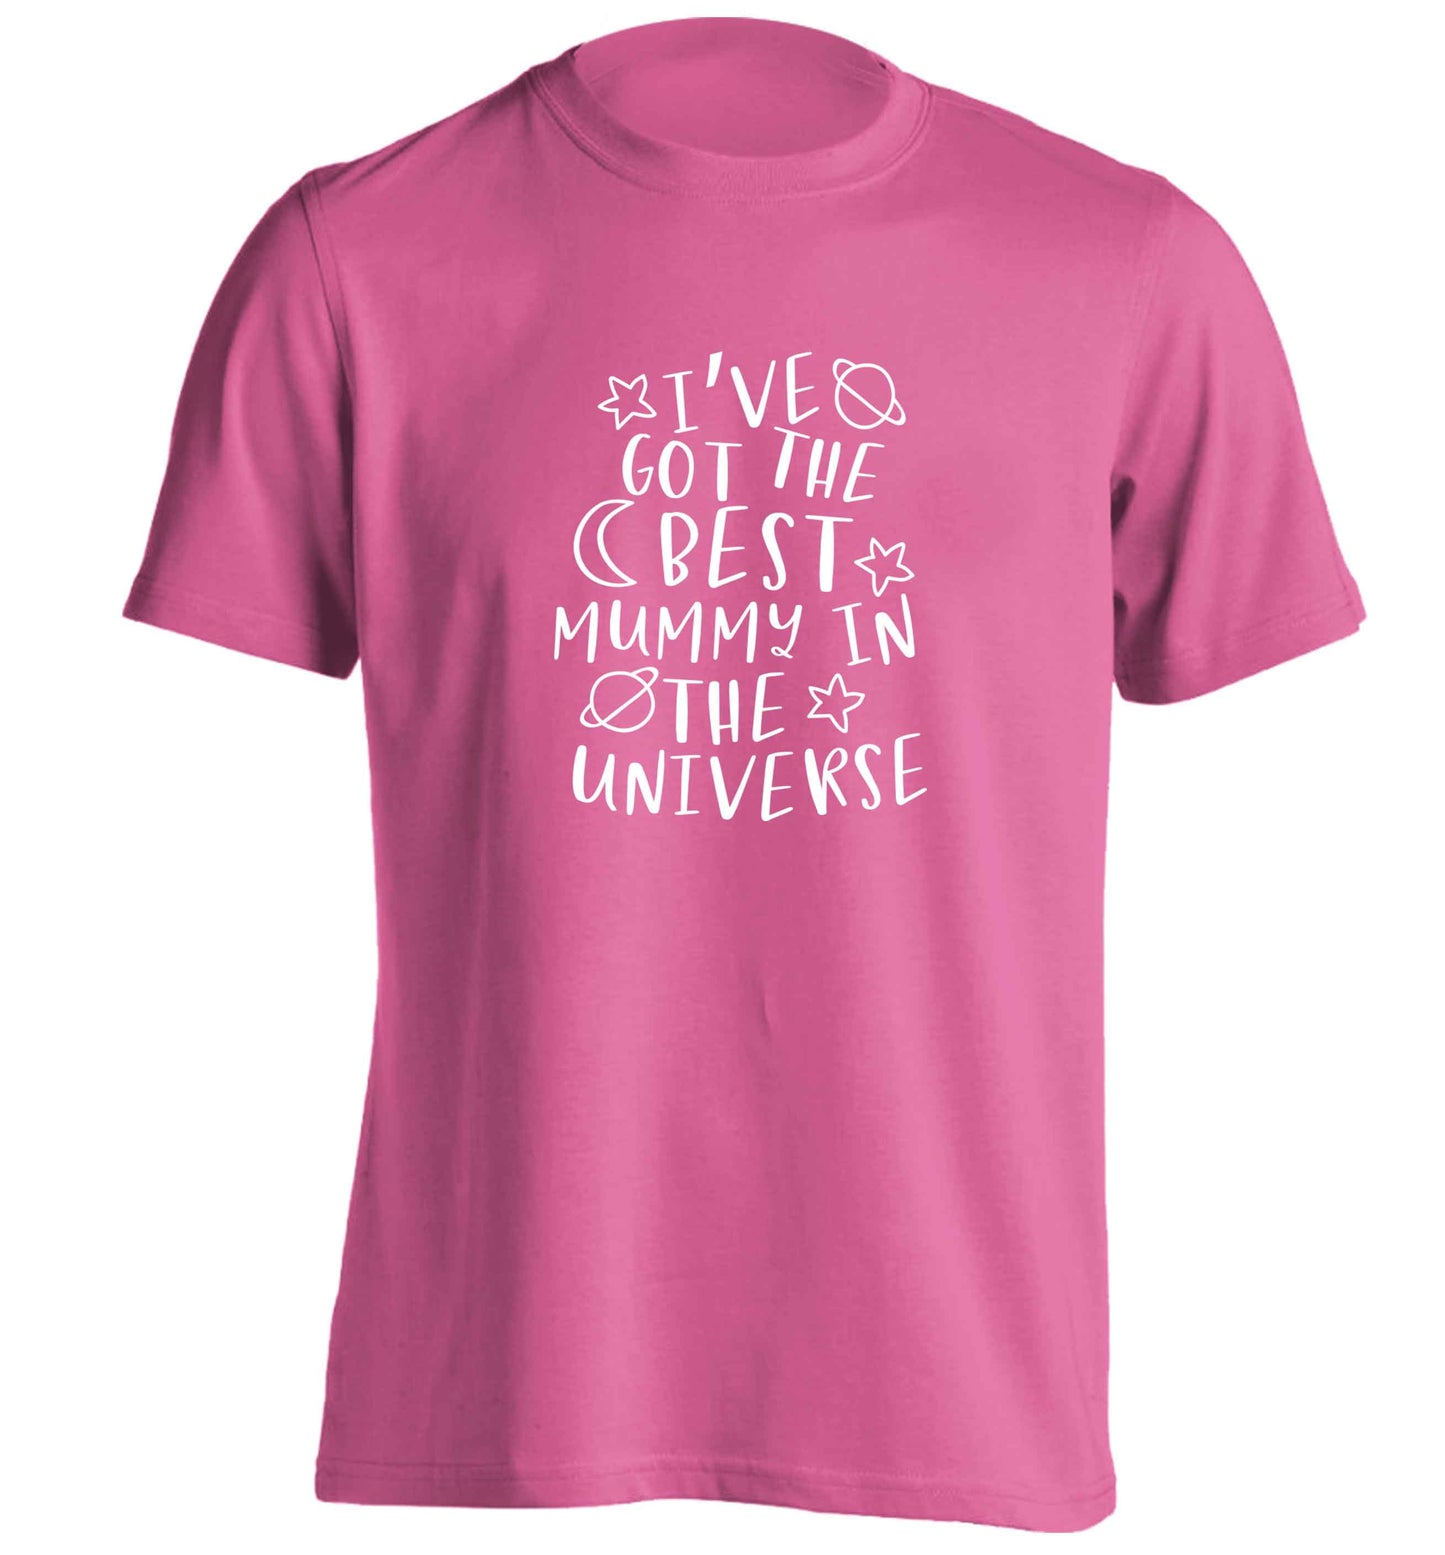 I've got the best mummy in the universe adults unisex pink Tshirt 2XL